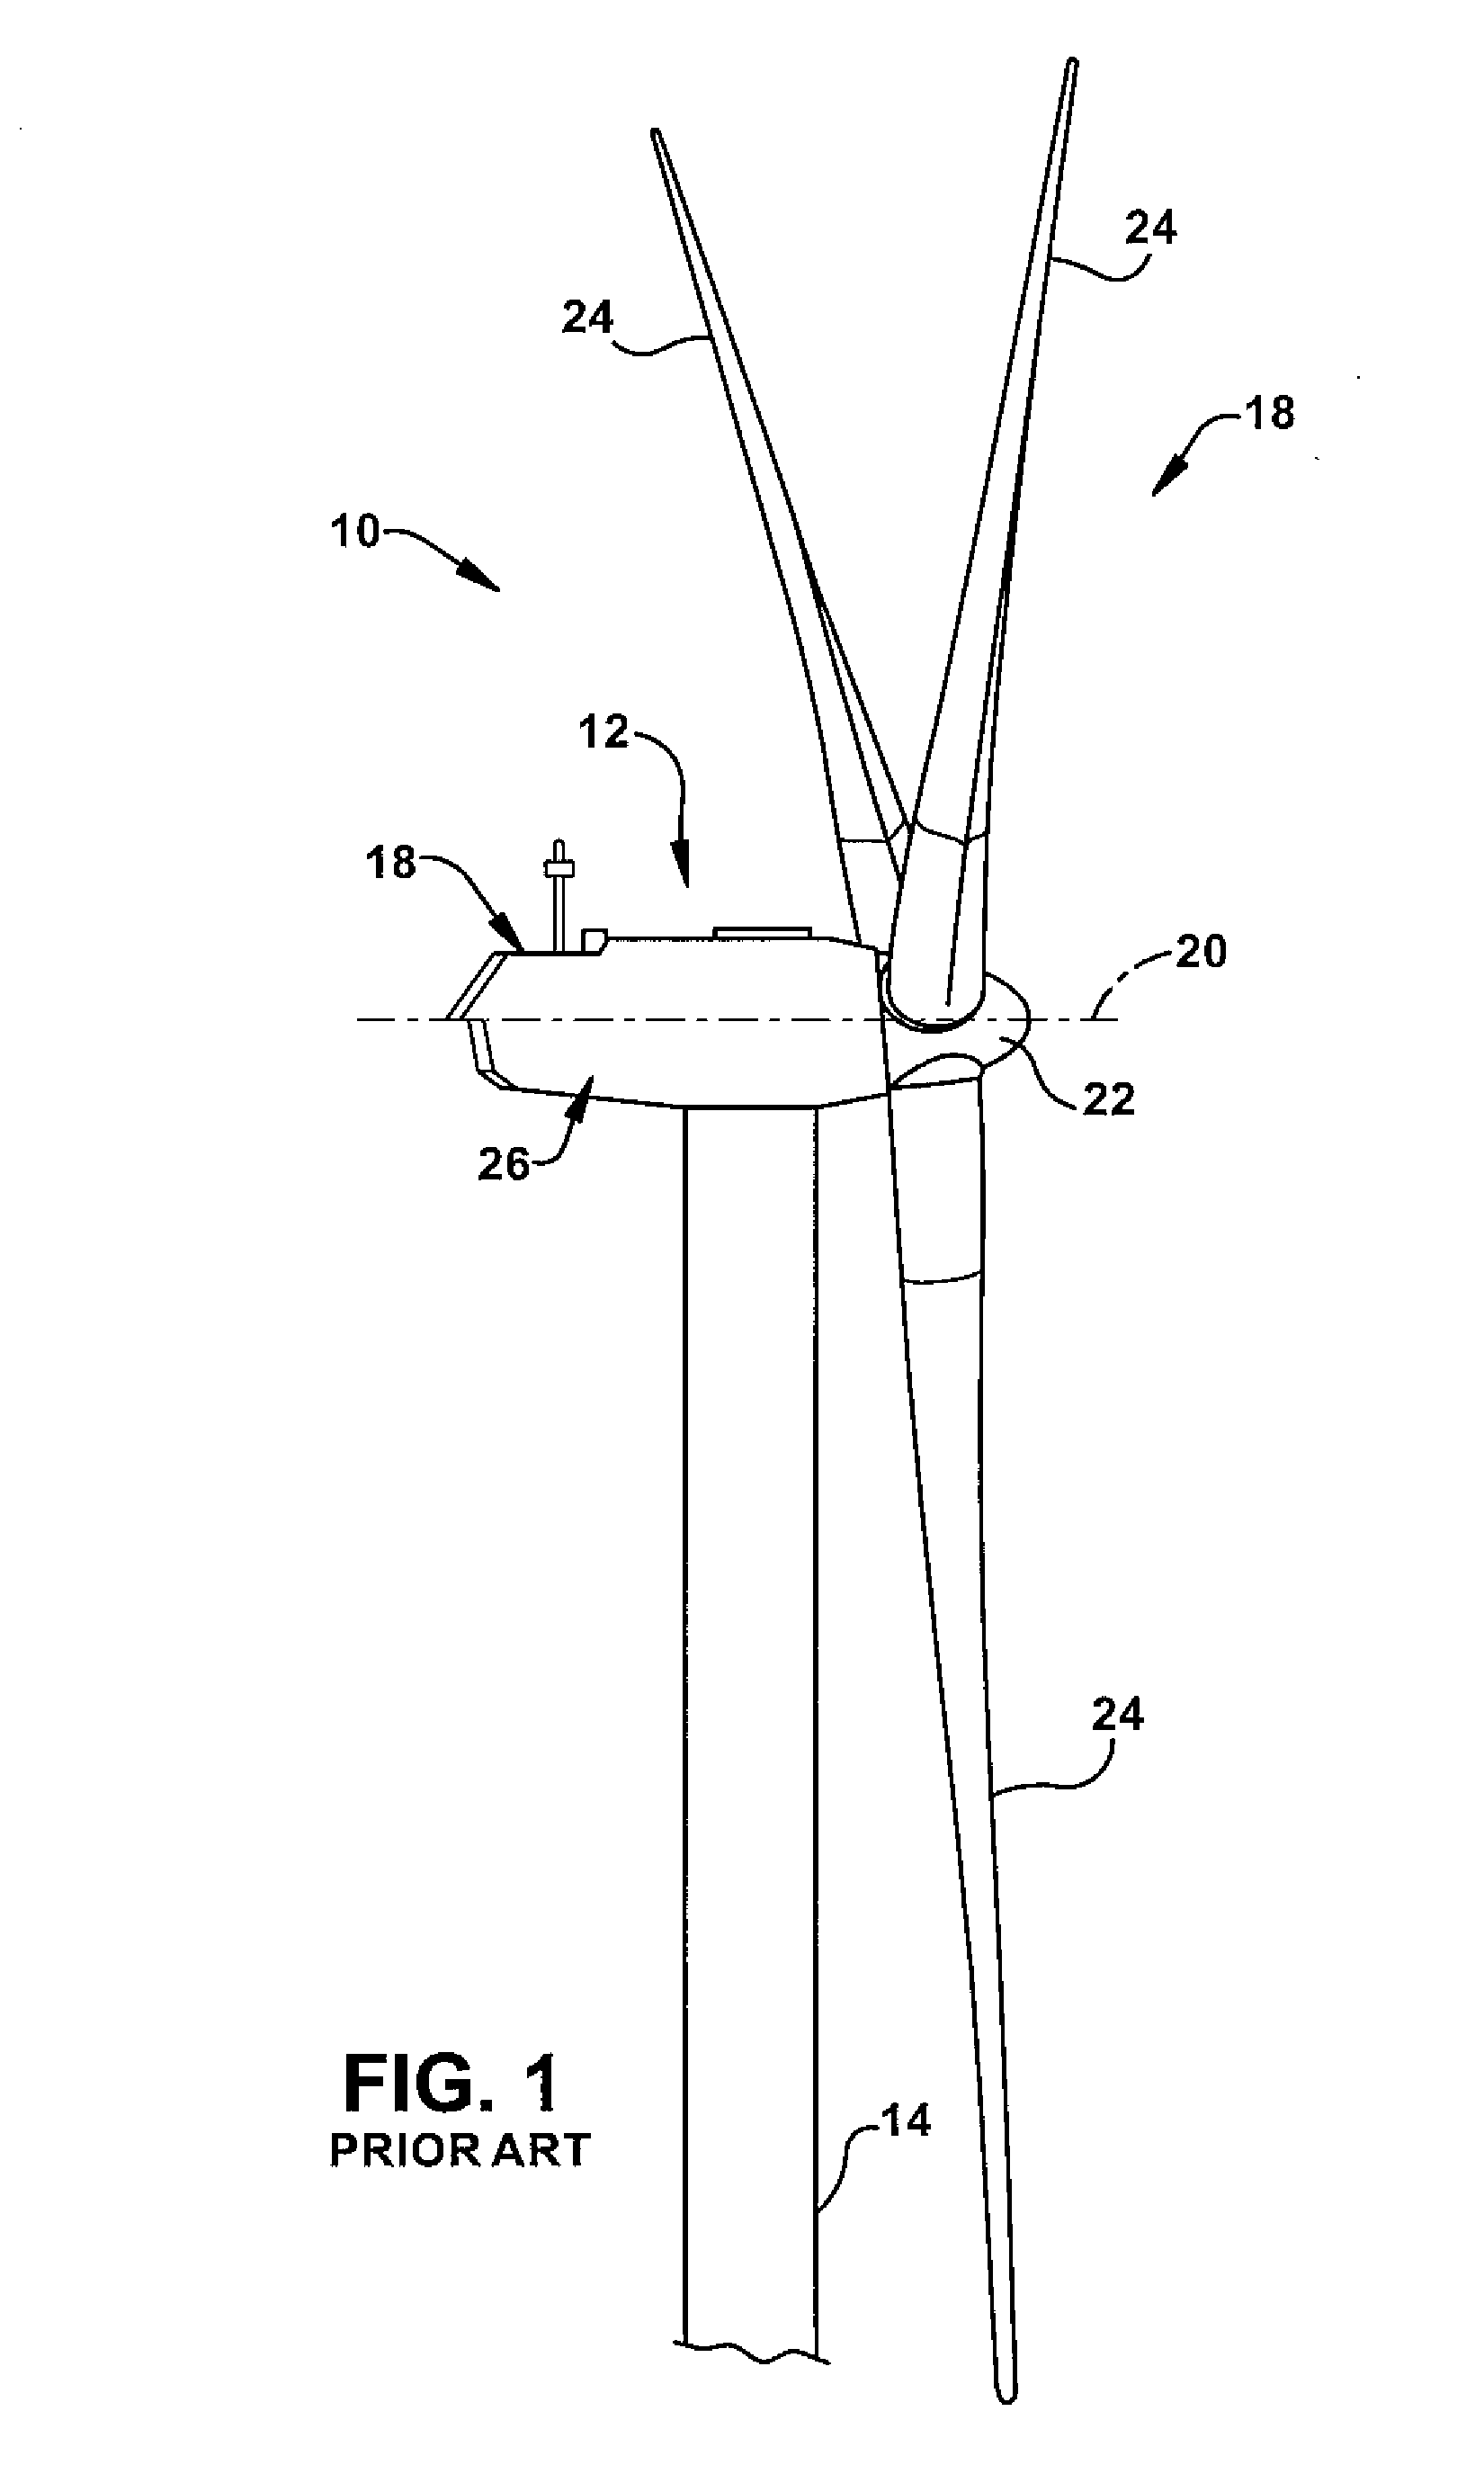 Structure and method for self-aligning rotor blade joints